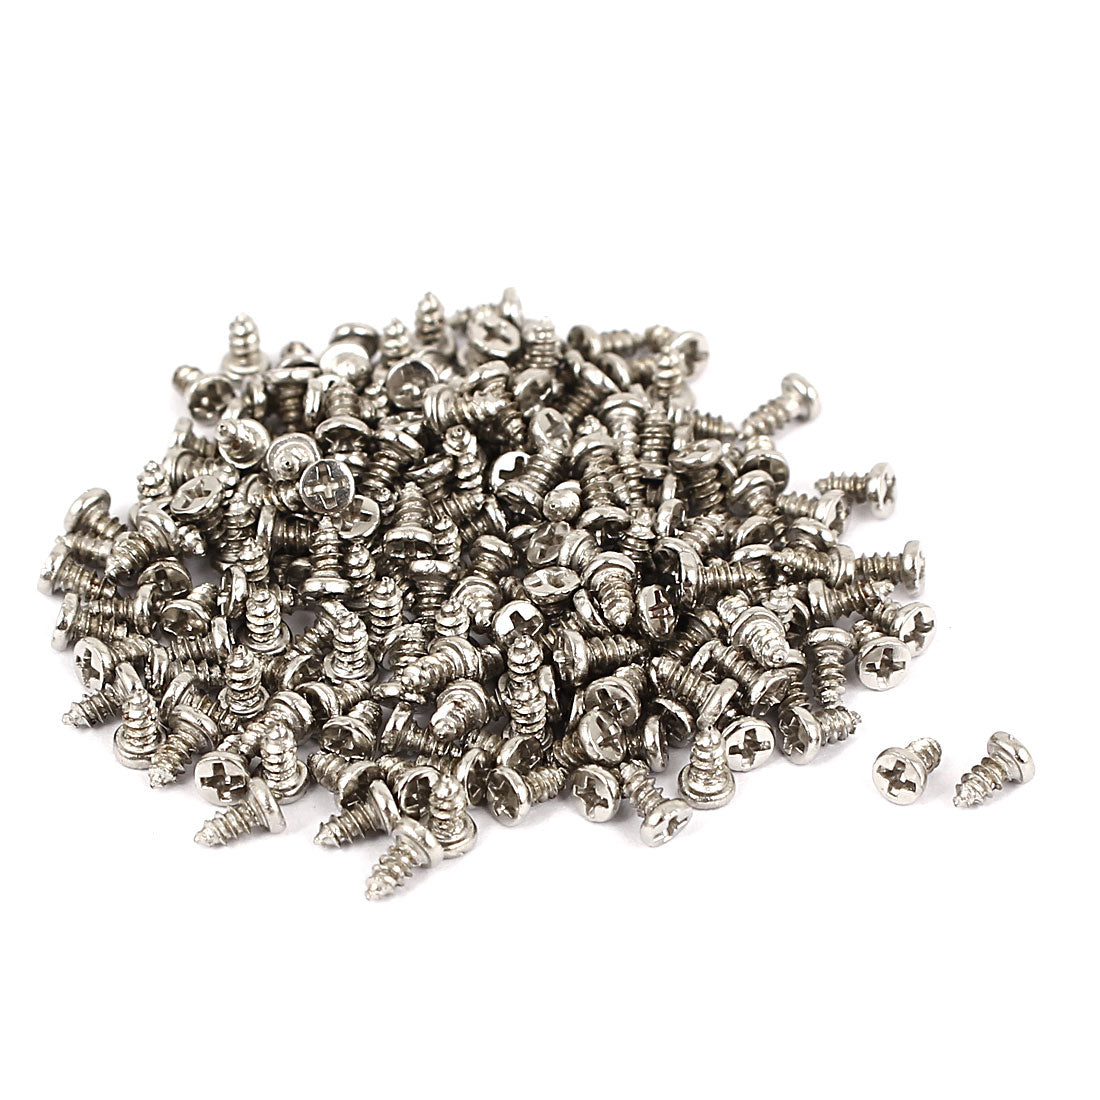 Uxcell Uxcell M1.5x3mm Thread Nickel Plated Phillips Round Head Self Tapping Screws 200pcs